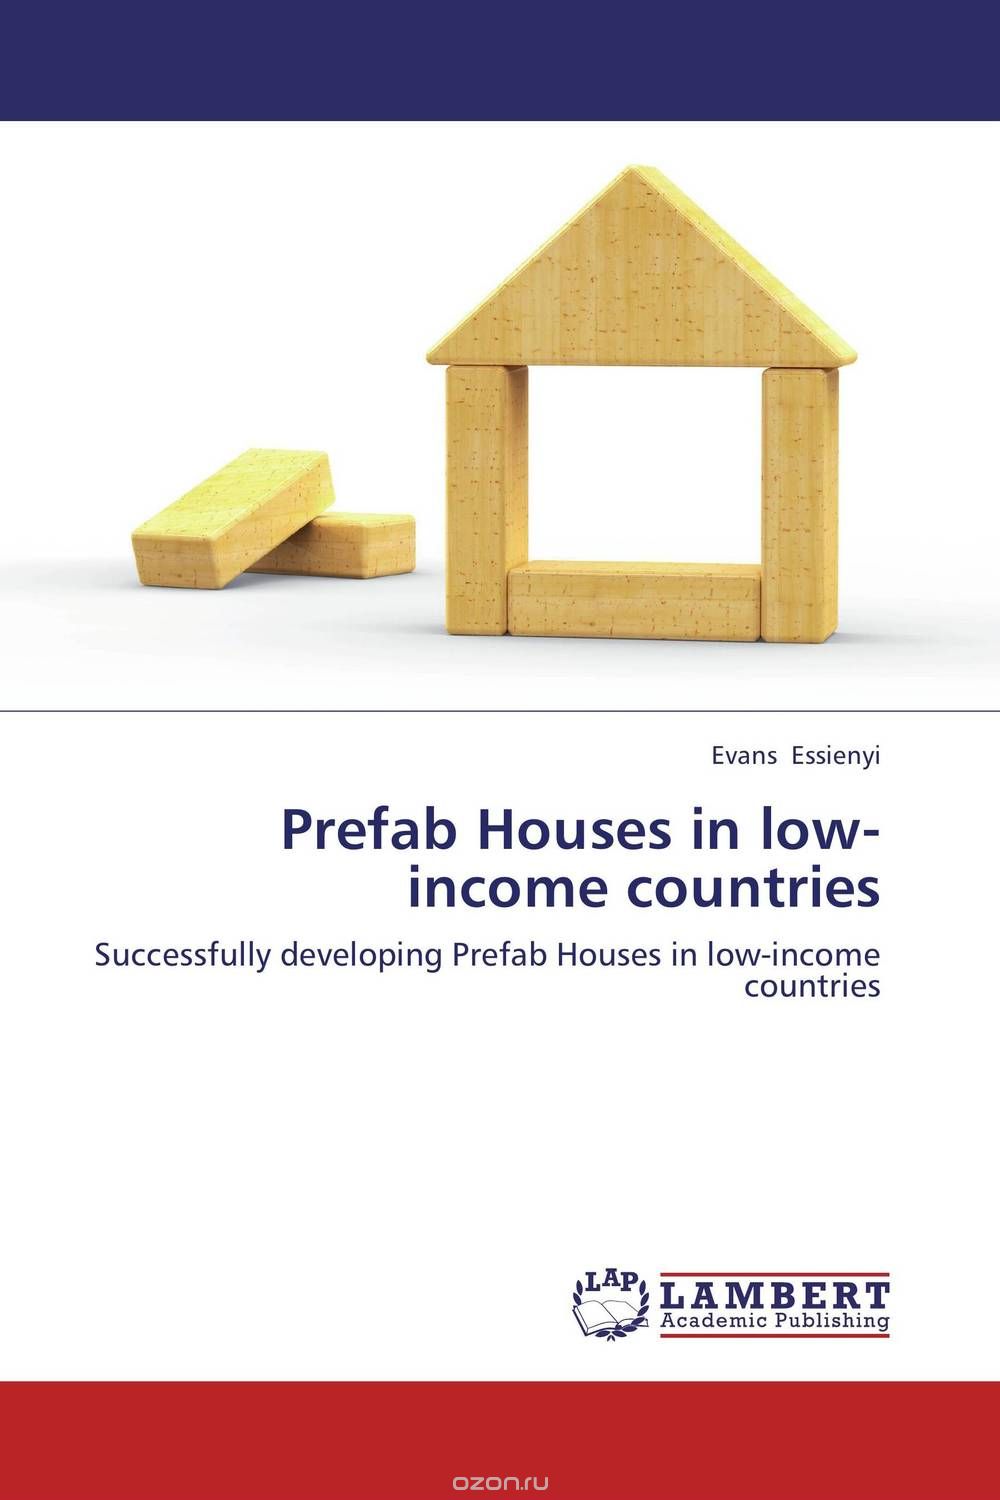 Prefab Houses in low-income countries